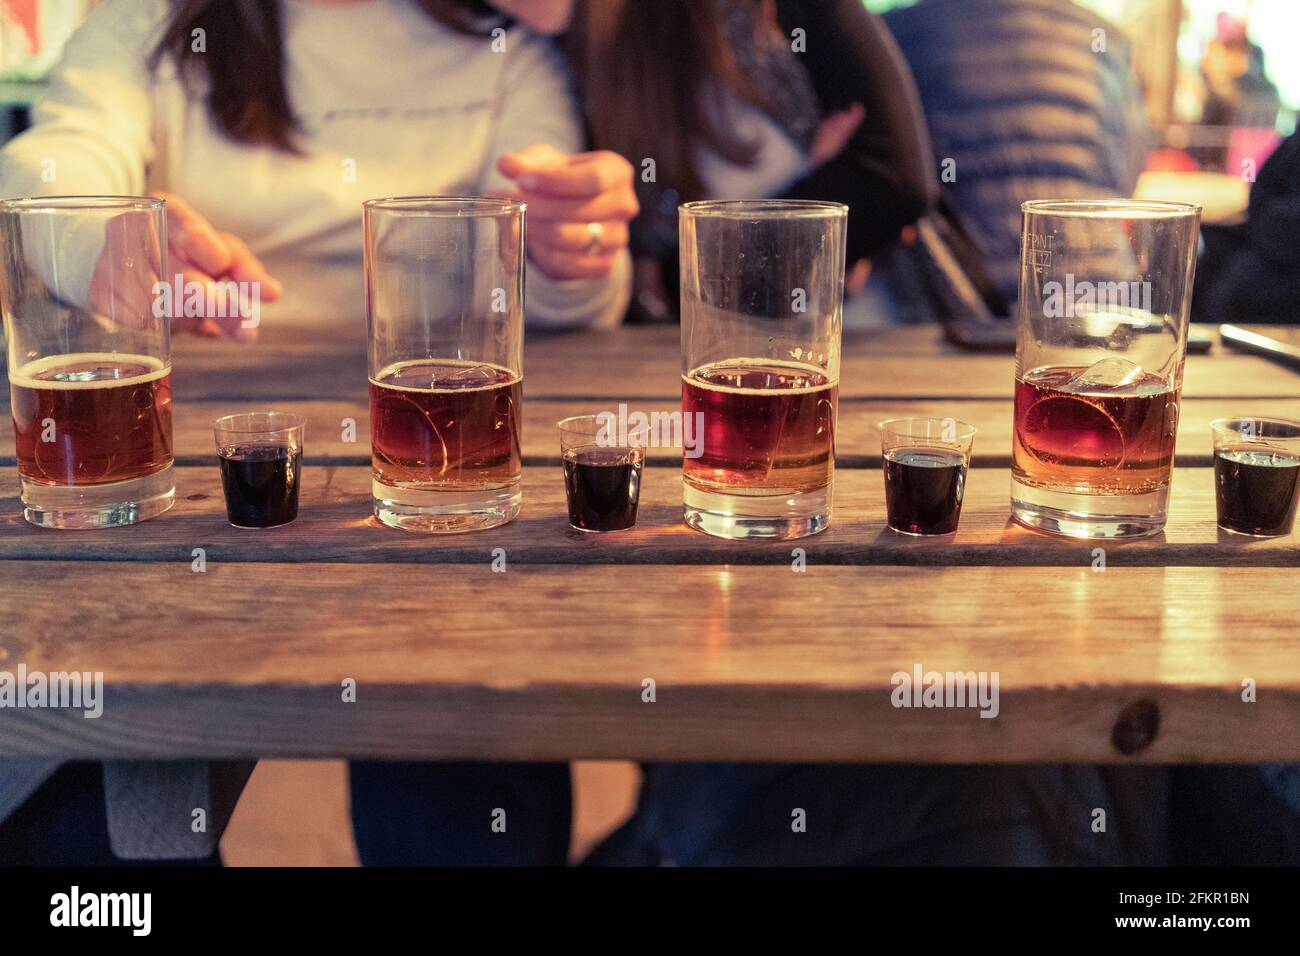 Pubs reopening post Covid-19 lockdown - Jägerbombs & black sumbuca shots on a wooden table outside Barton's Mill pub in Old Basing, UK. May 2021 Stock Photo